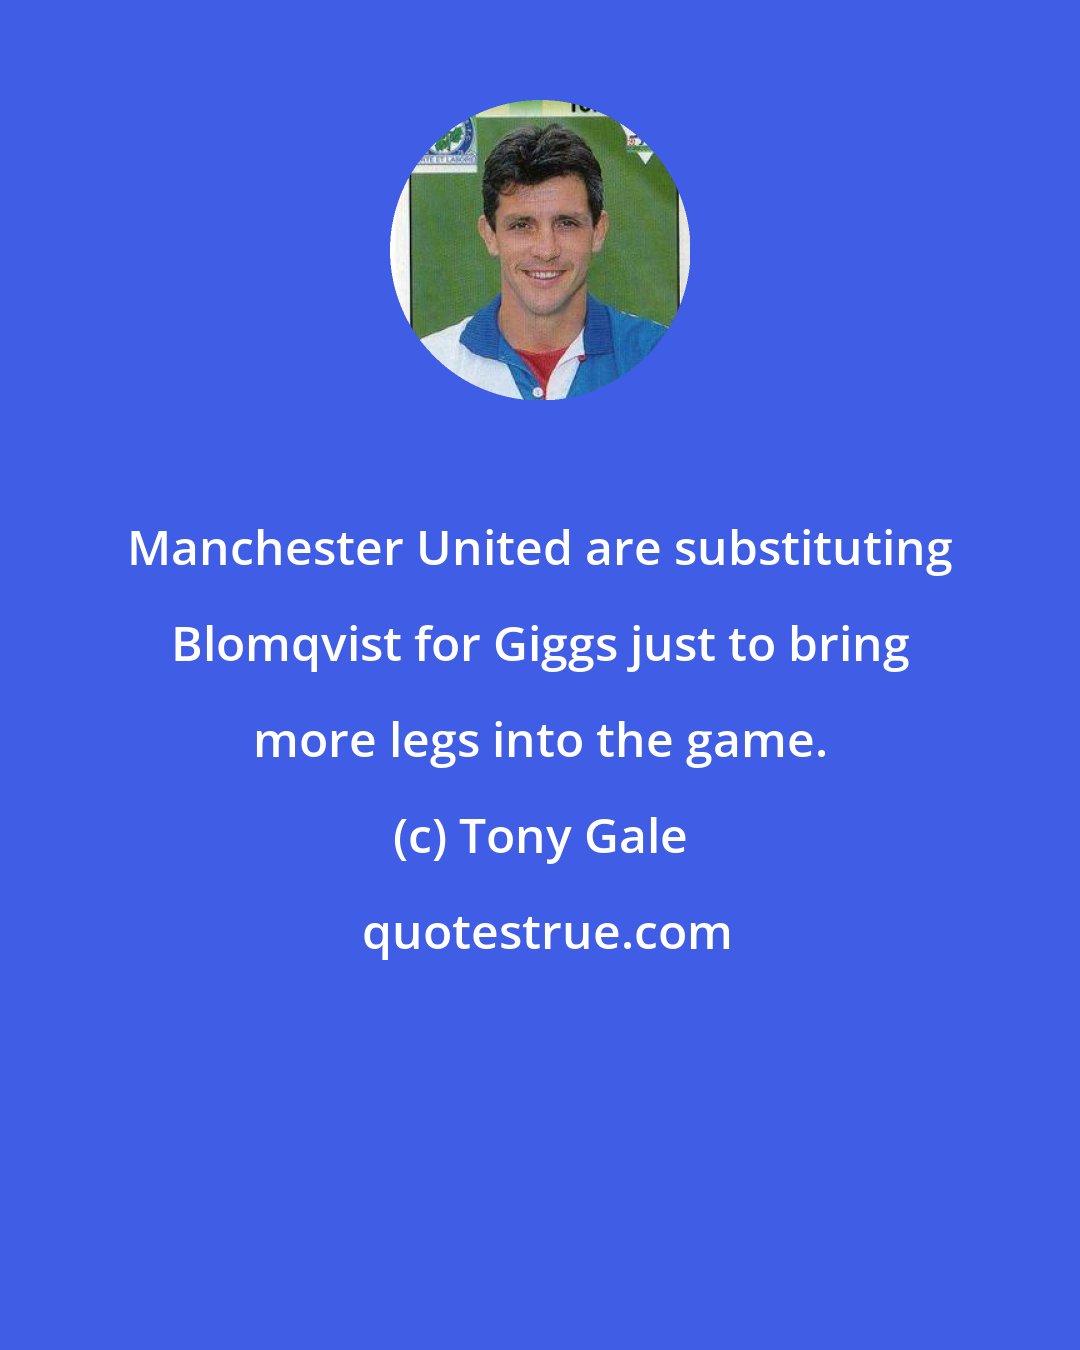 Tony Gale: Manchester United are substituting Blomqvist for Giggs just to bring more legs into the game.